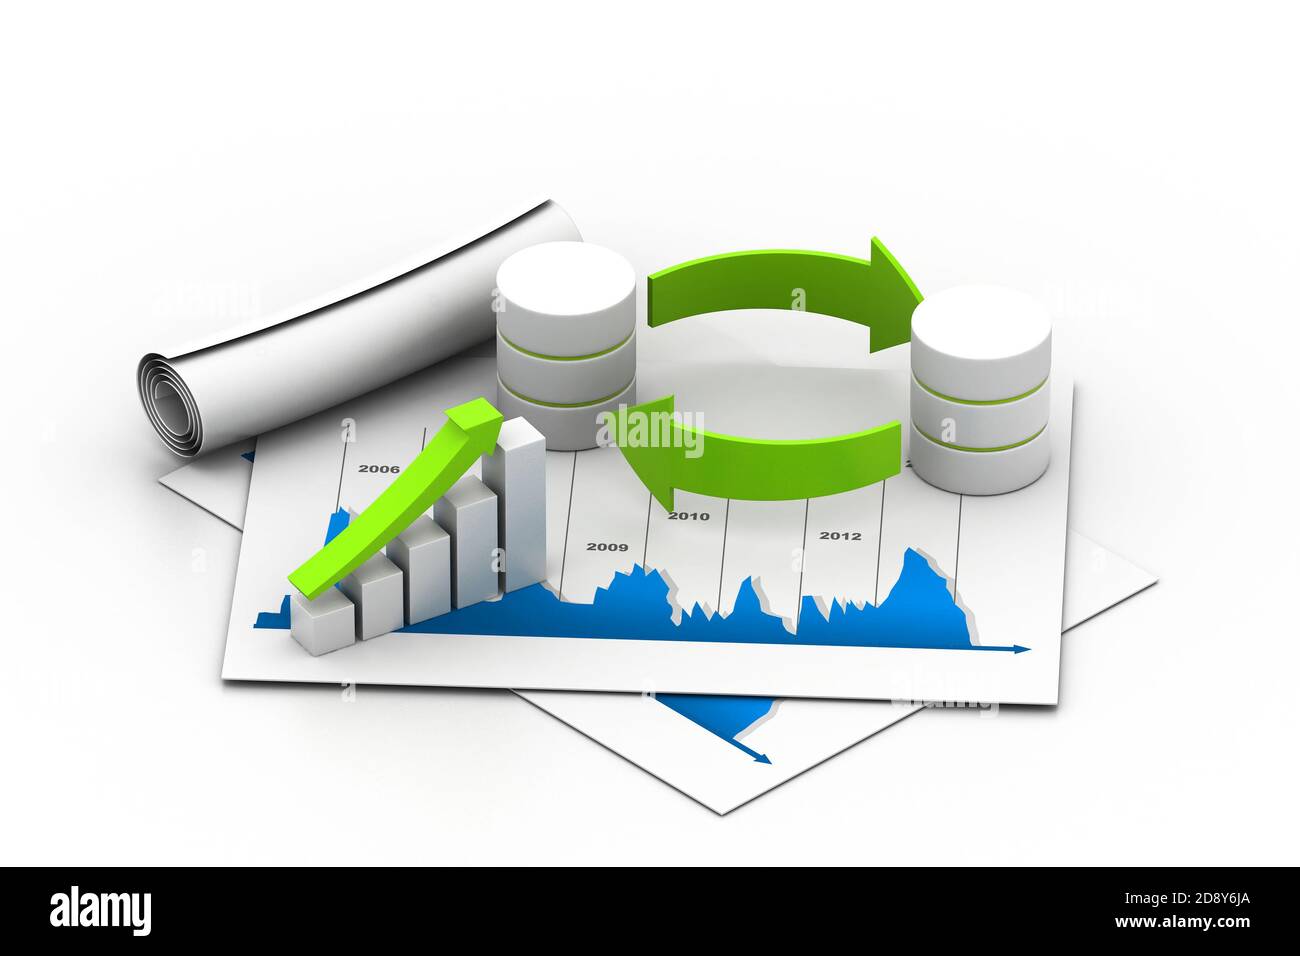 Databases concept icon with graph in chart Stock Photo